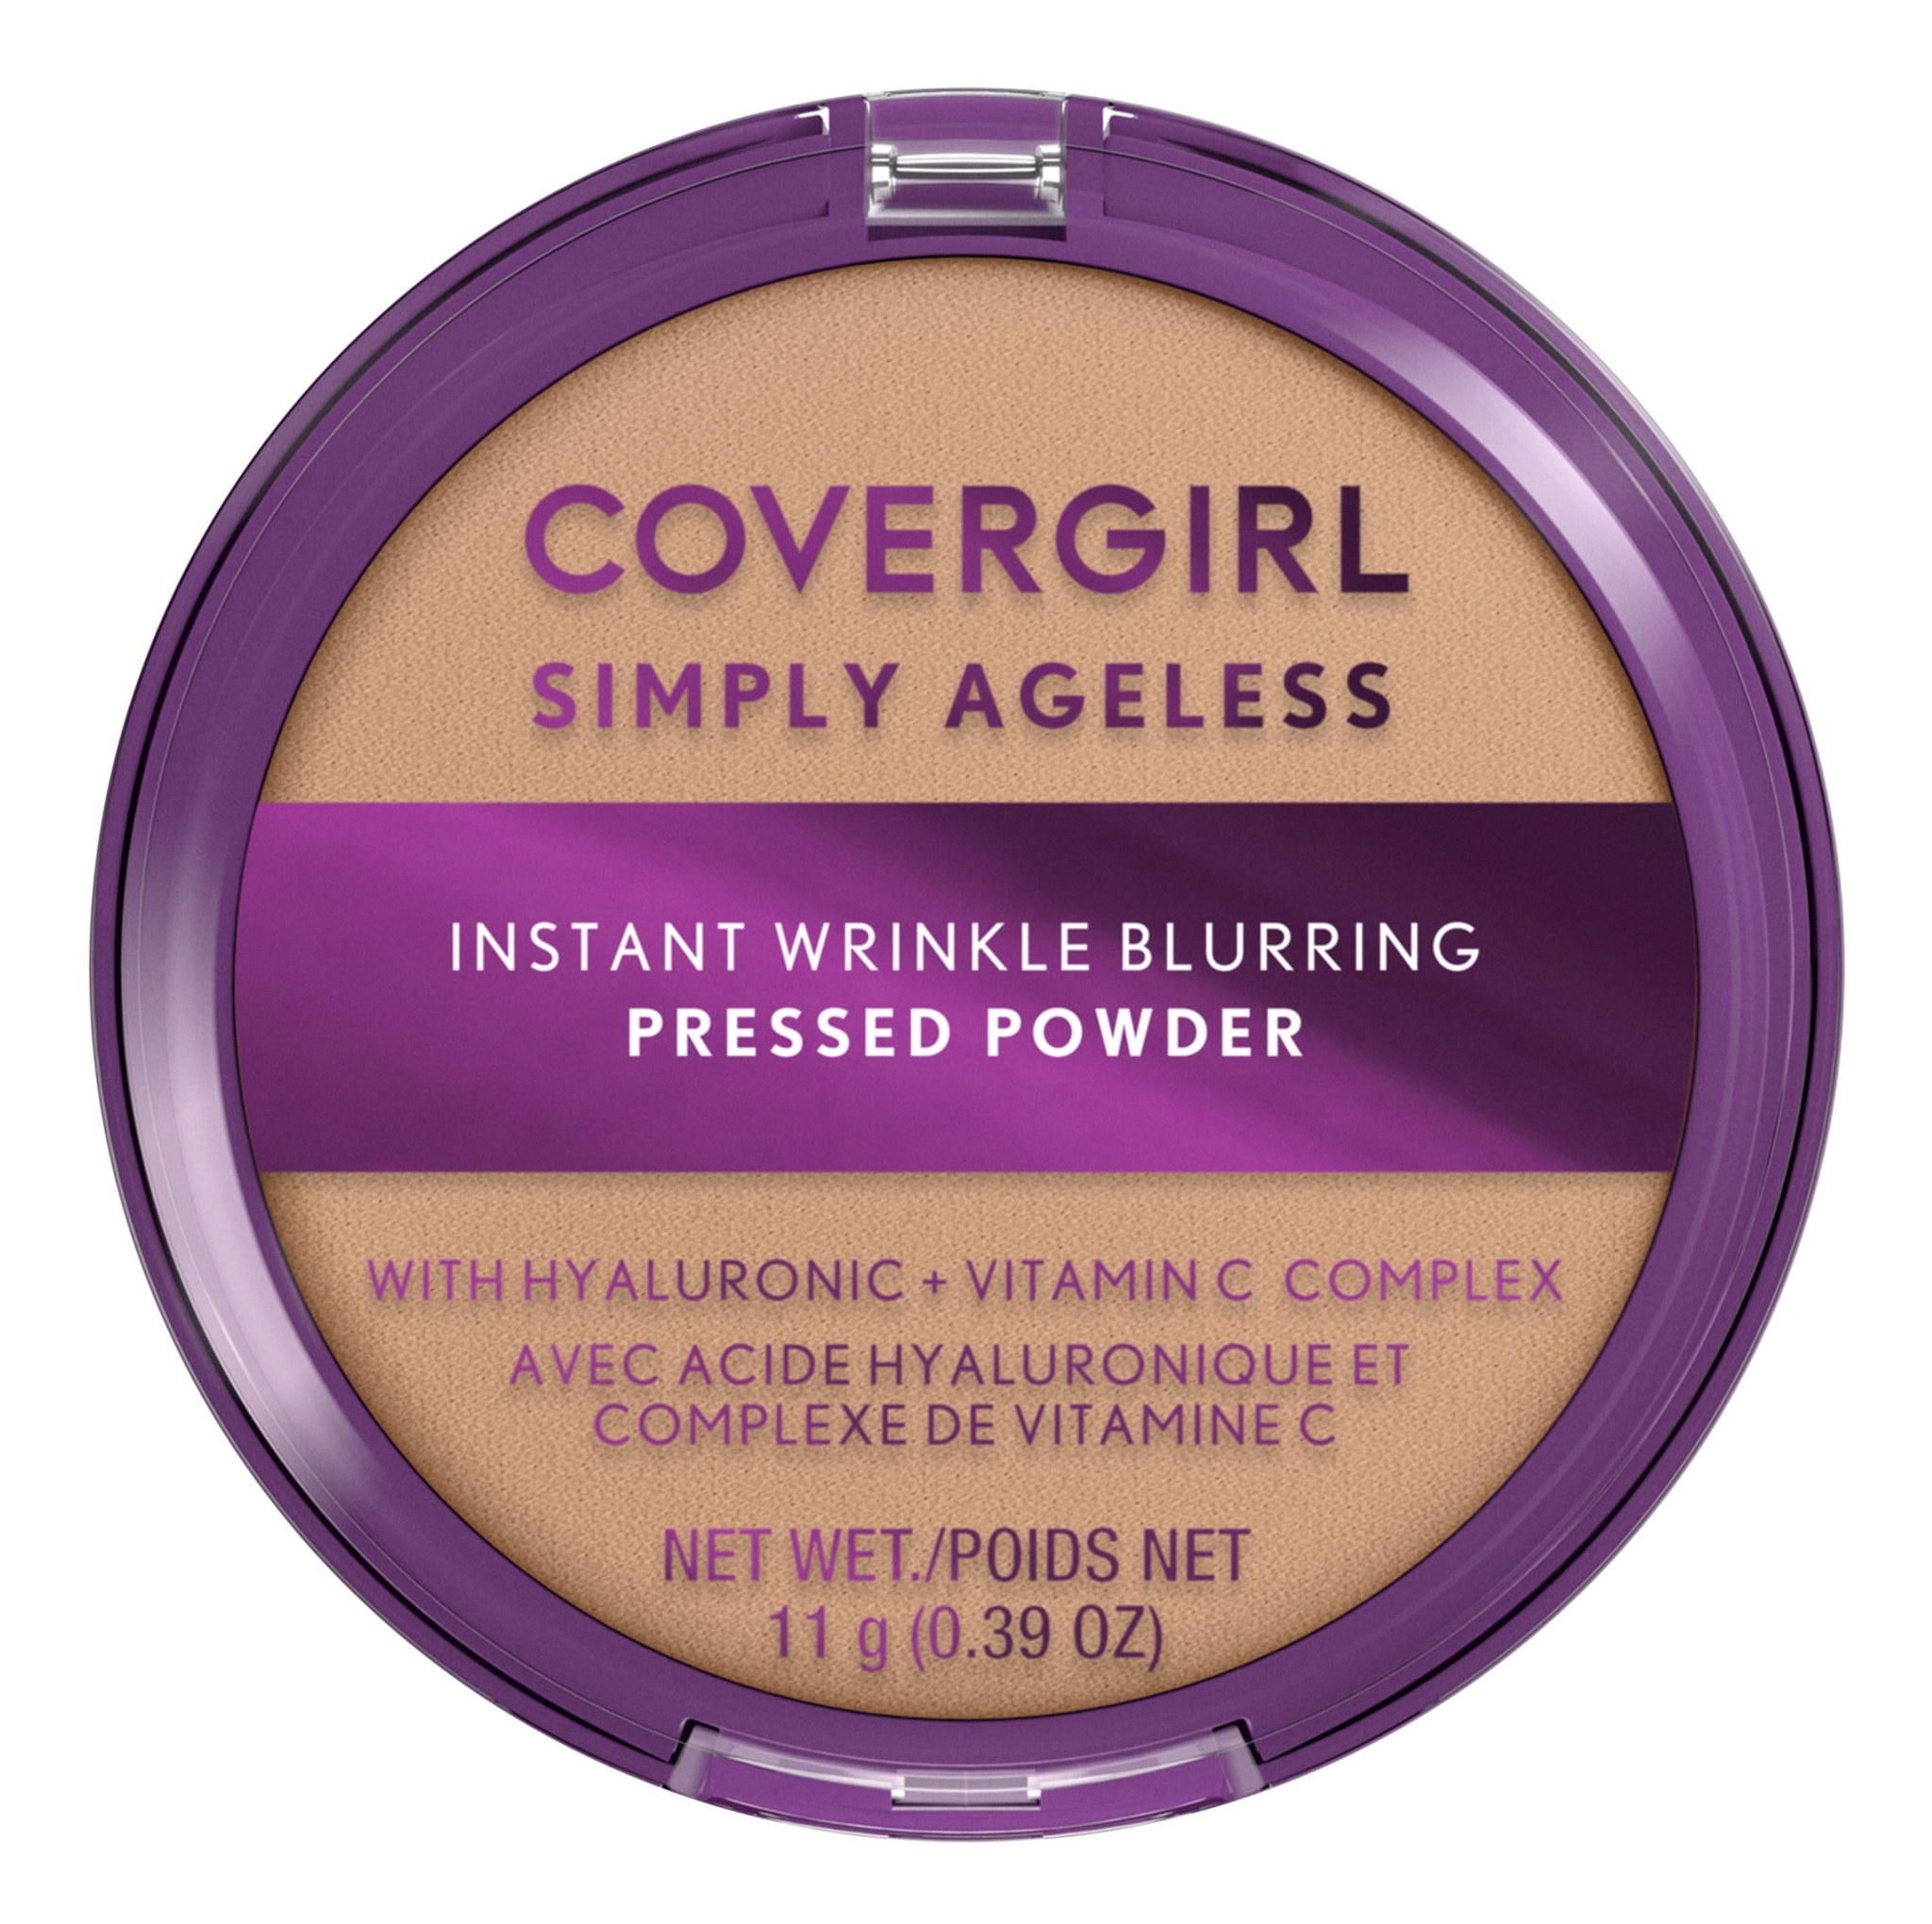 COVERGIRL® Cover Girl, Simply Ageless, Instant Wrinkle, Blurring Pressed Powder